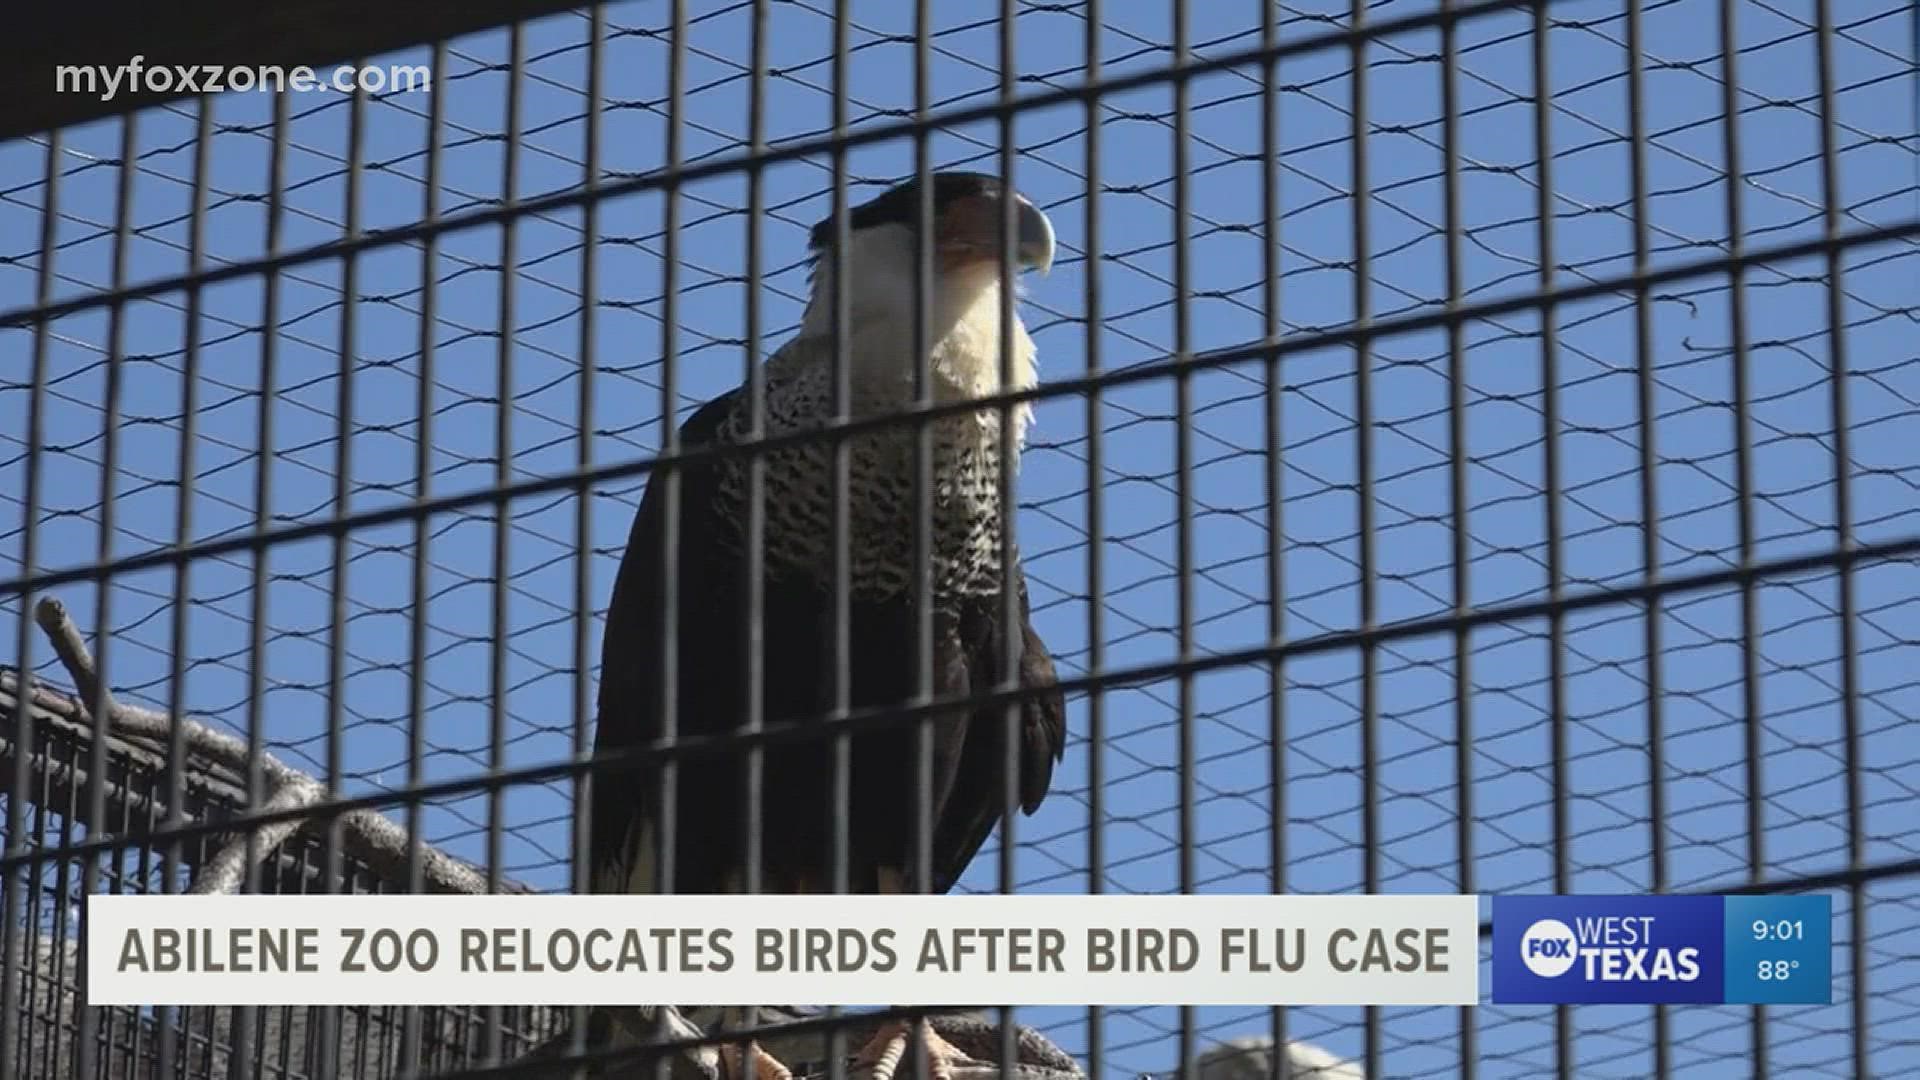 According to the USDA, a case of avian influenza has been documented in Erath County. The Abilene Zoo is taking immediate steps to protect the birds in its care.